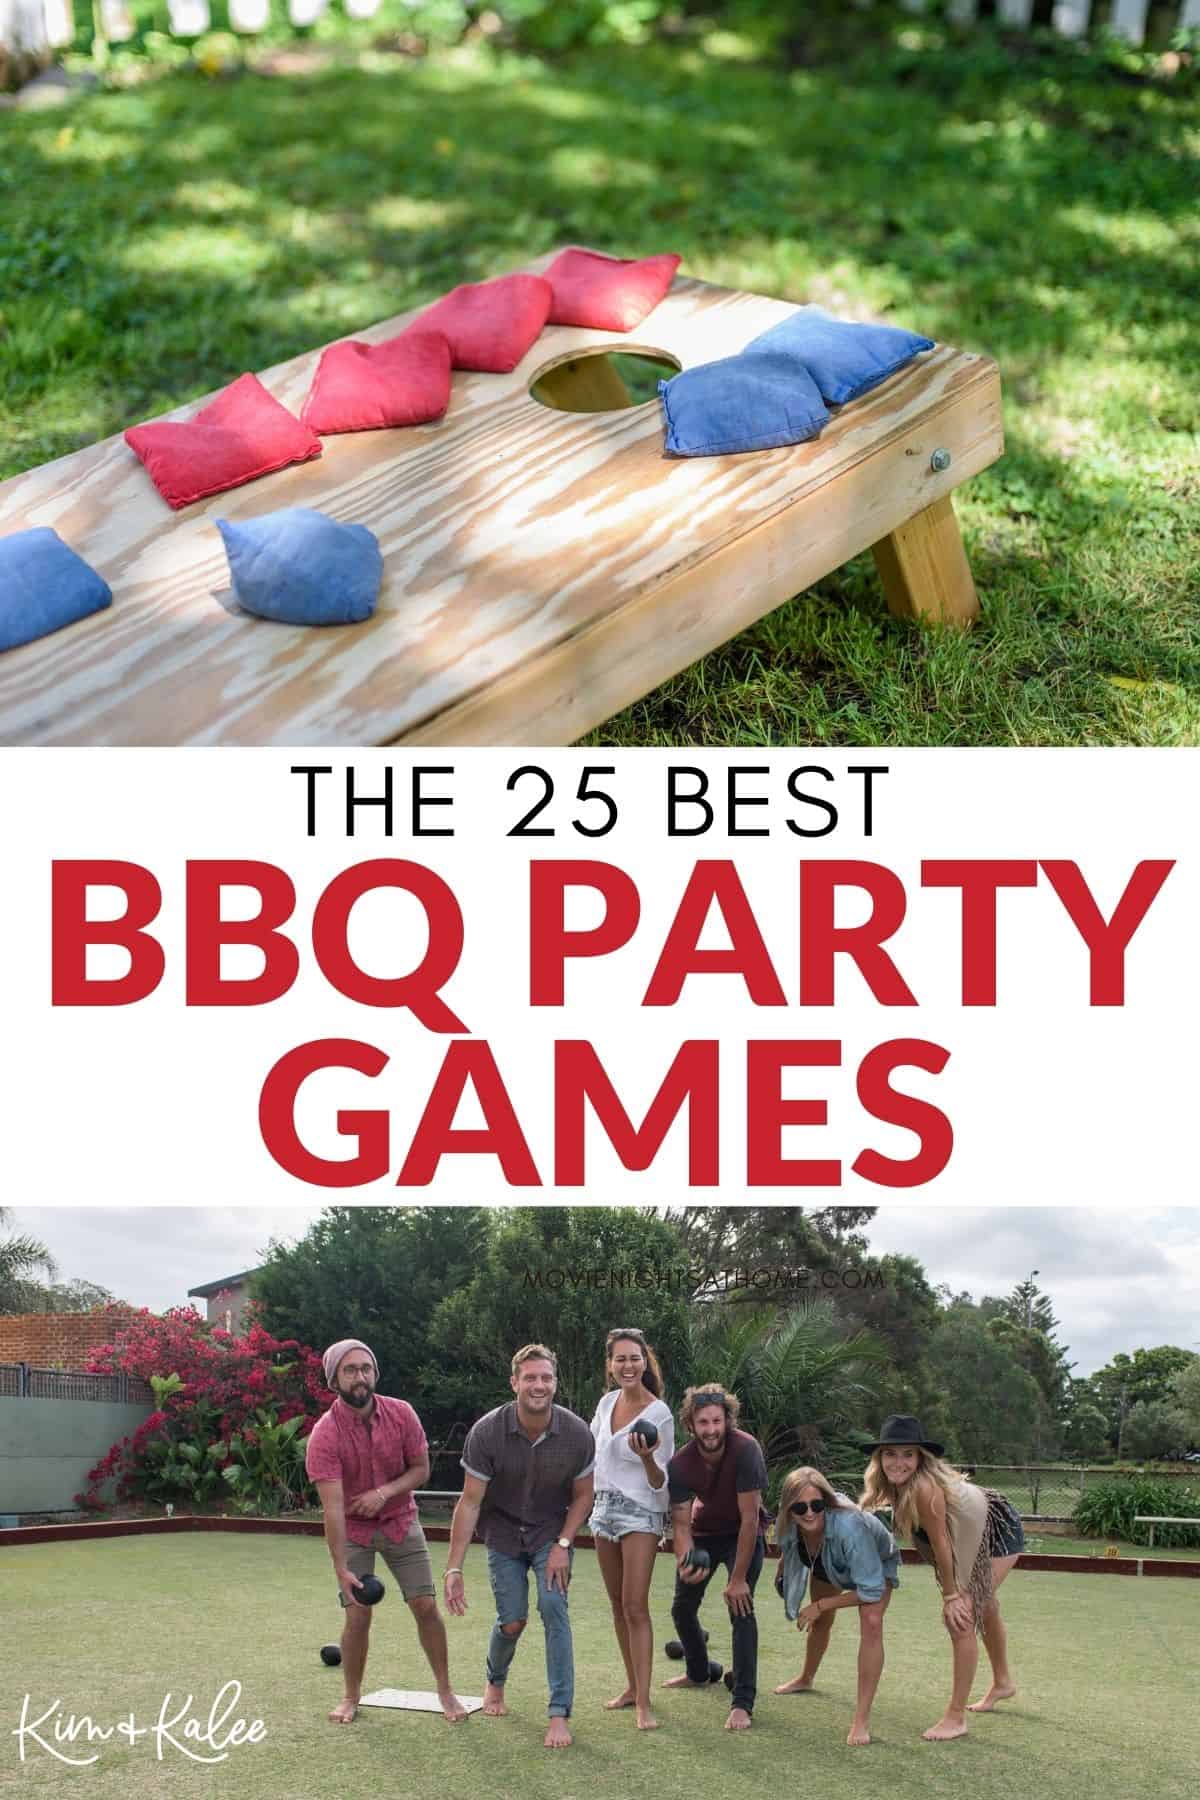 collage of a close up of a cornhole board and a group of adults playing corn hole - text overlay in the middle says The 25 Best BBQ Party Games